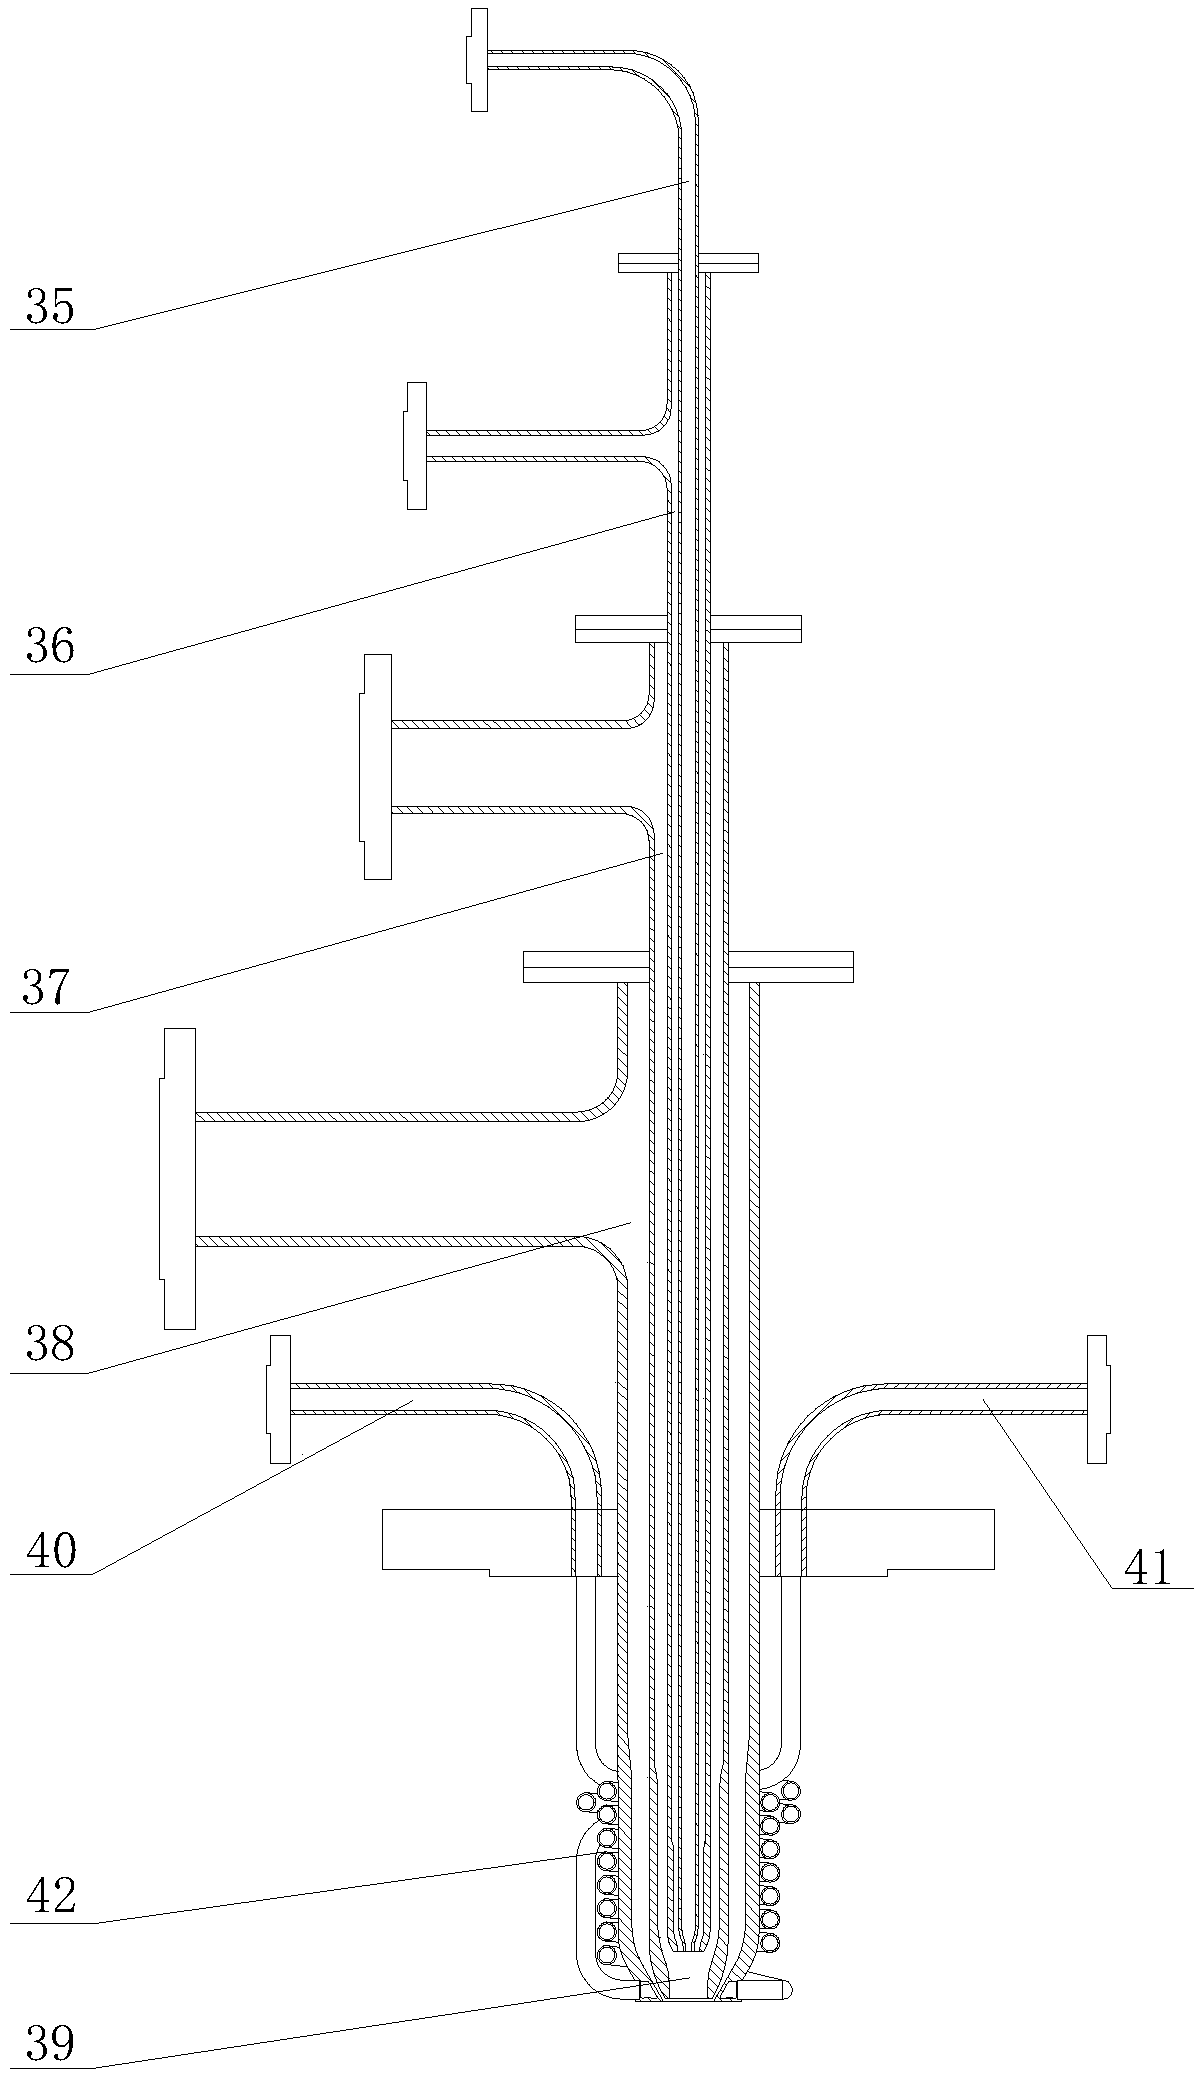 Method for jointly gasifying coal and heavy oil for preparing synthesis gas